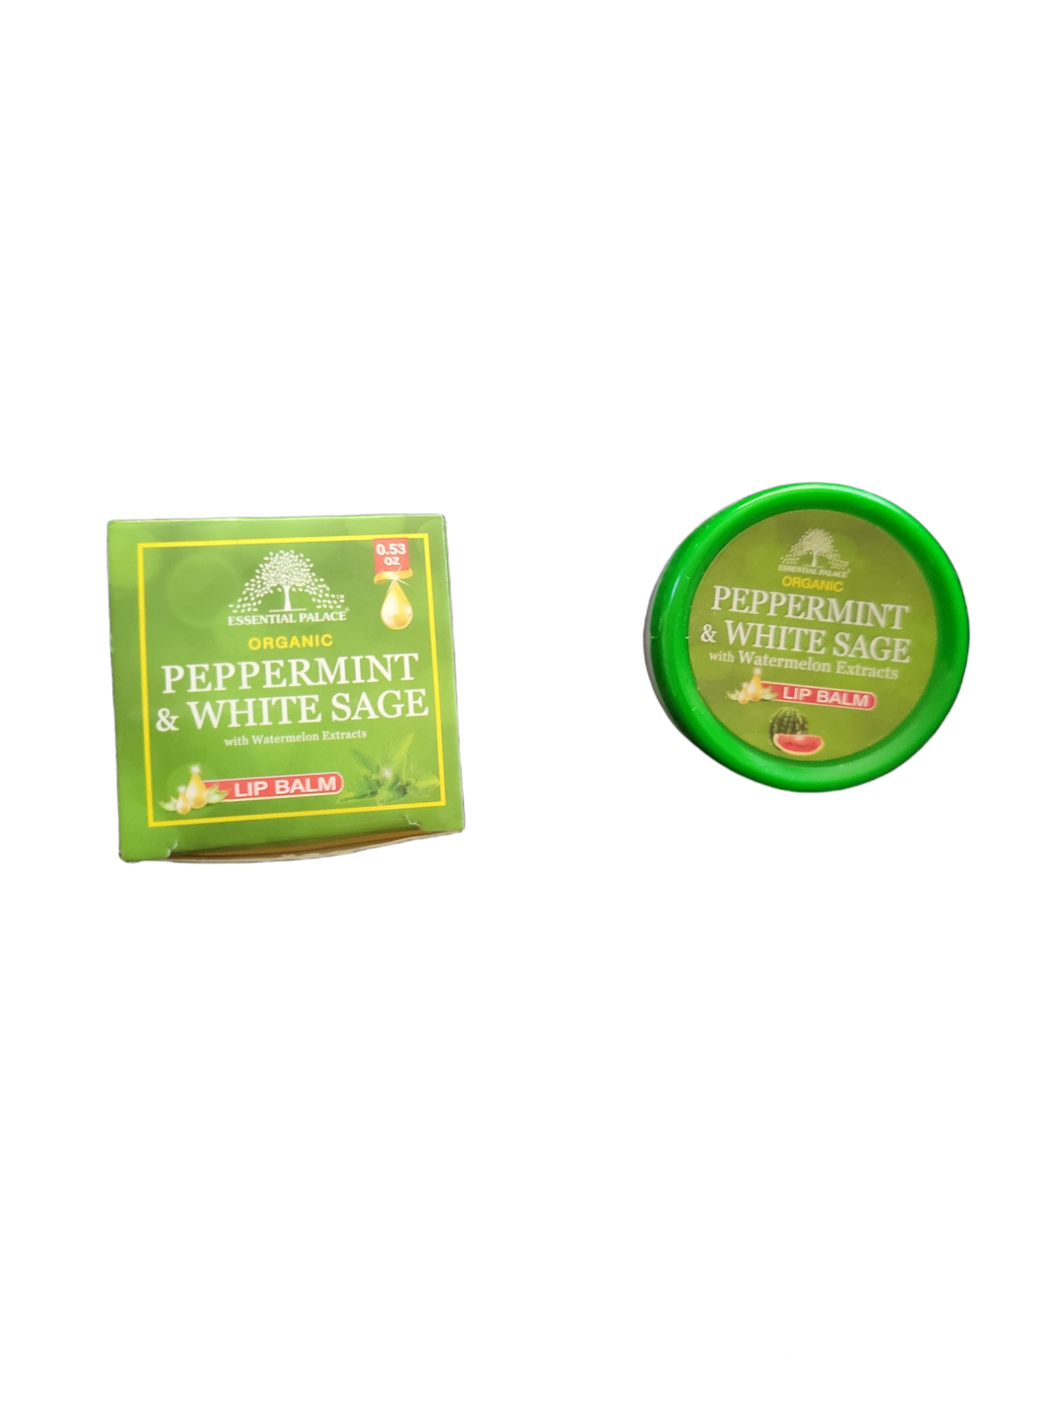 Peppermint & White Sage Lip Balm with Watermelon Extracts